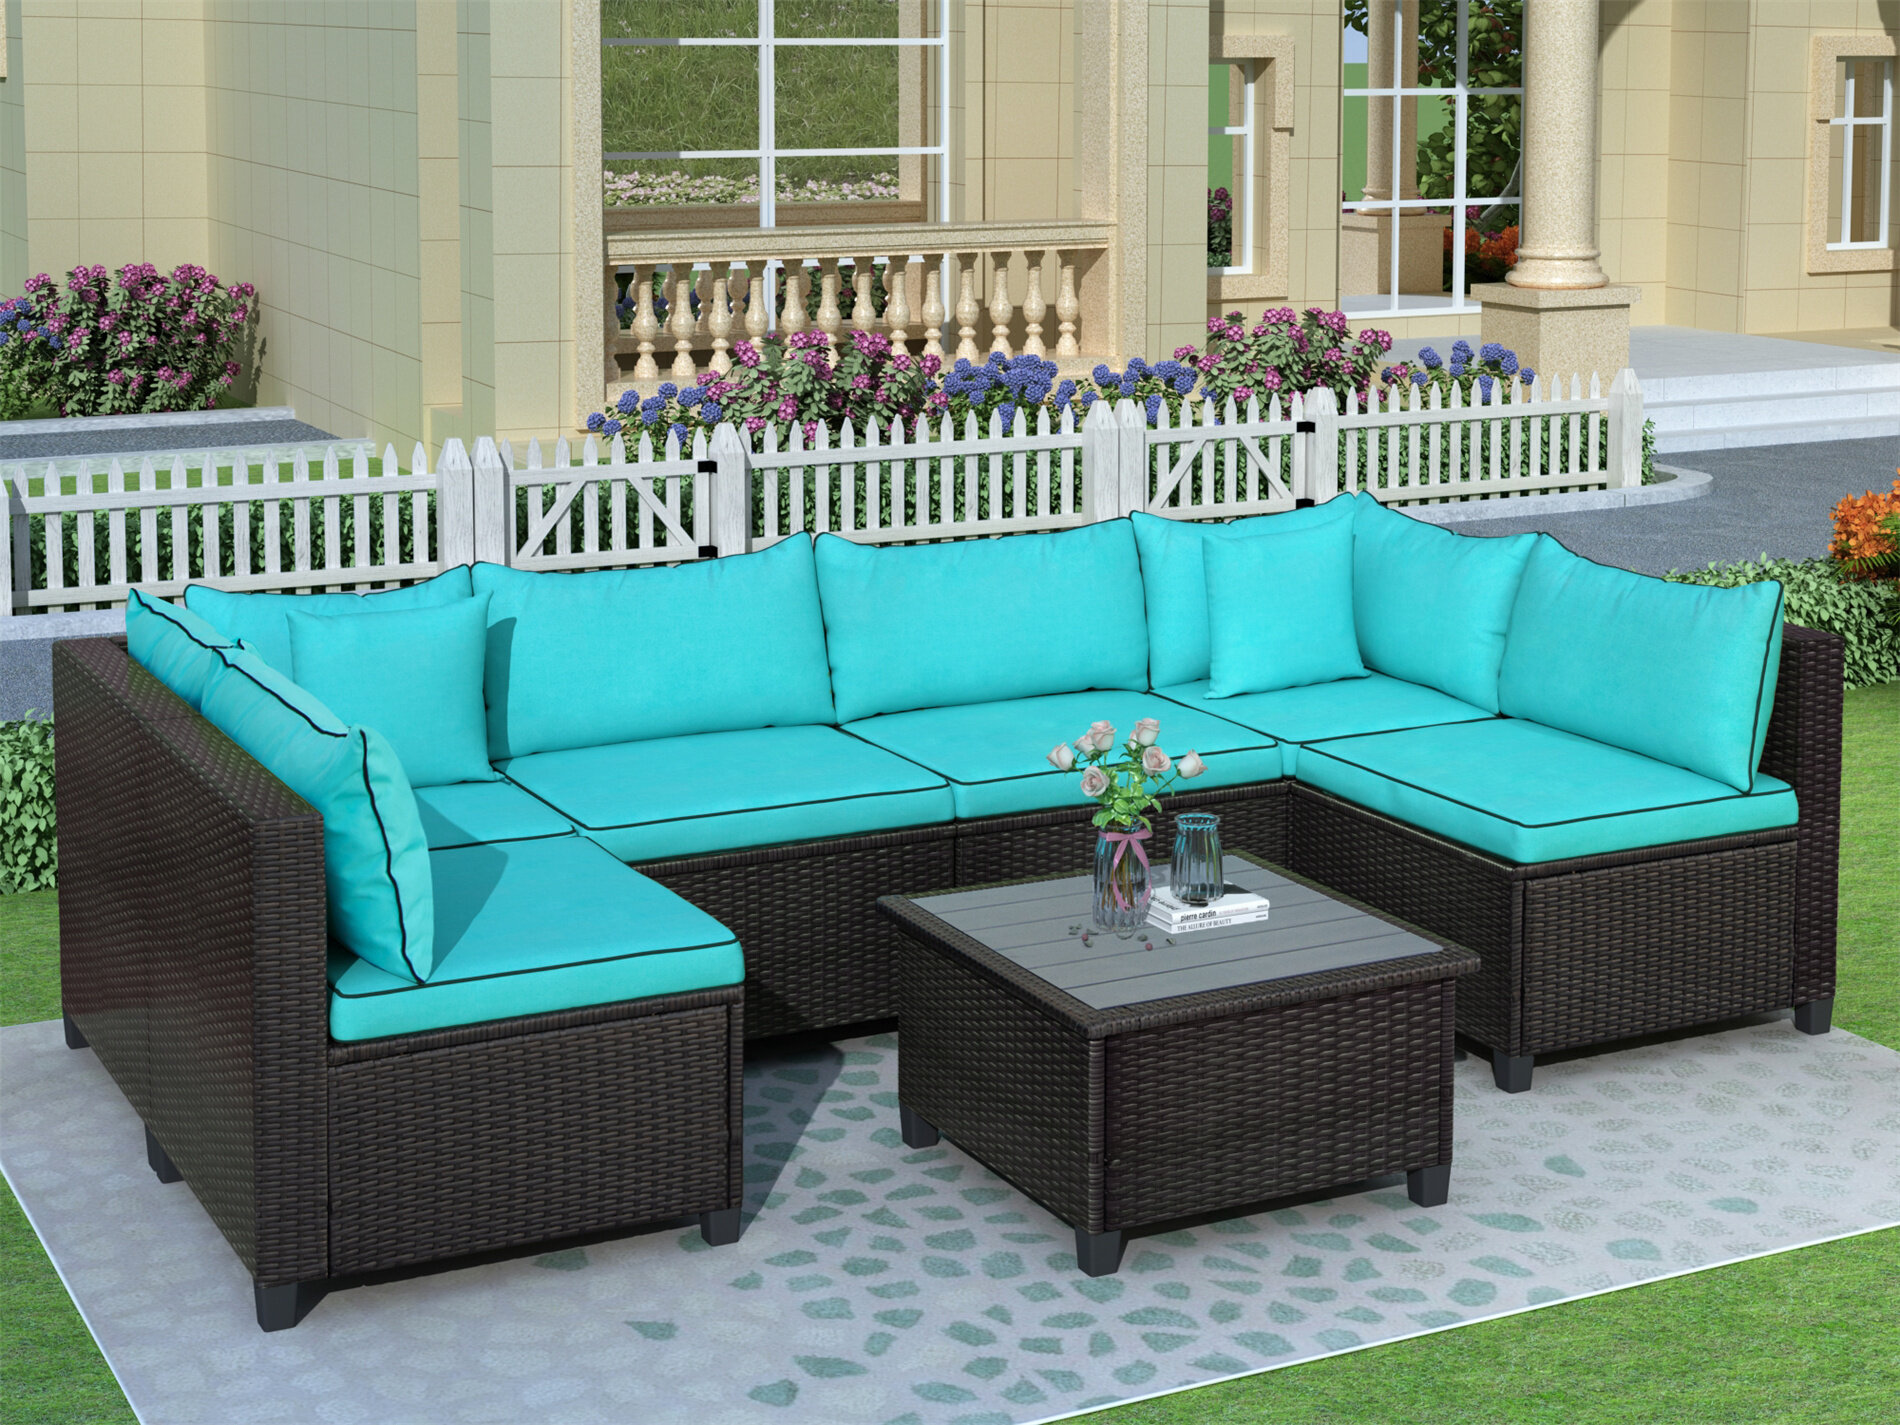 Details about   Outdoor Indoor Rattan Wicker Sofa Ottoman Sectional Patio Couch Steel & Wicker 